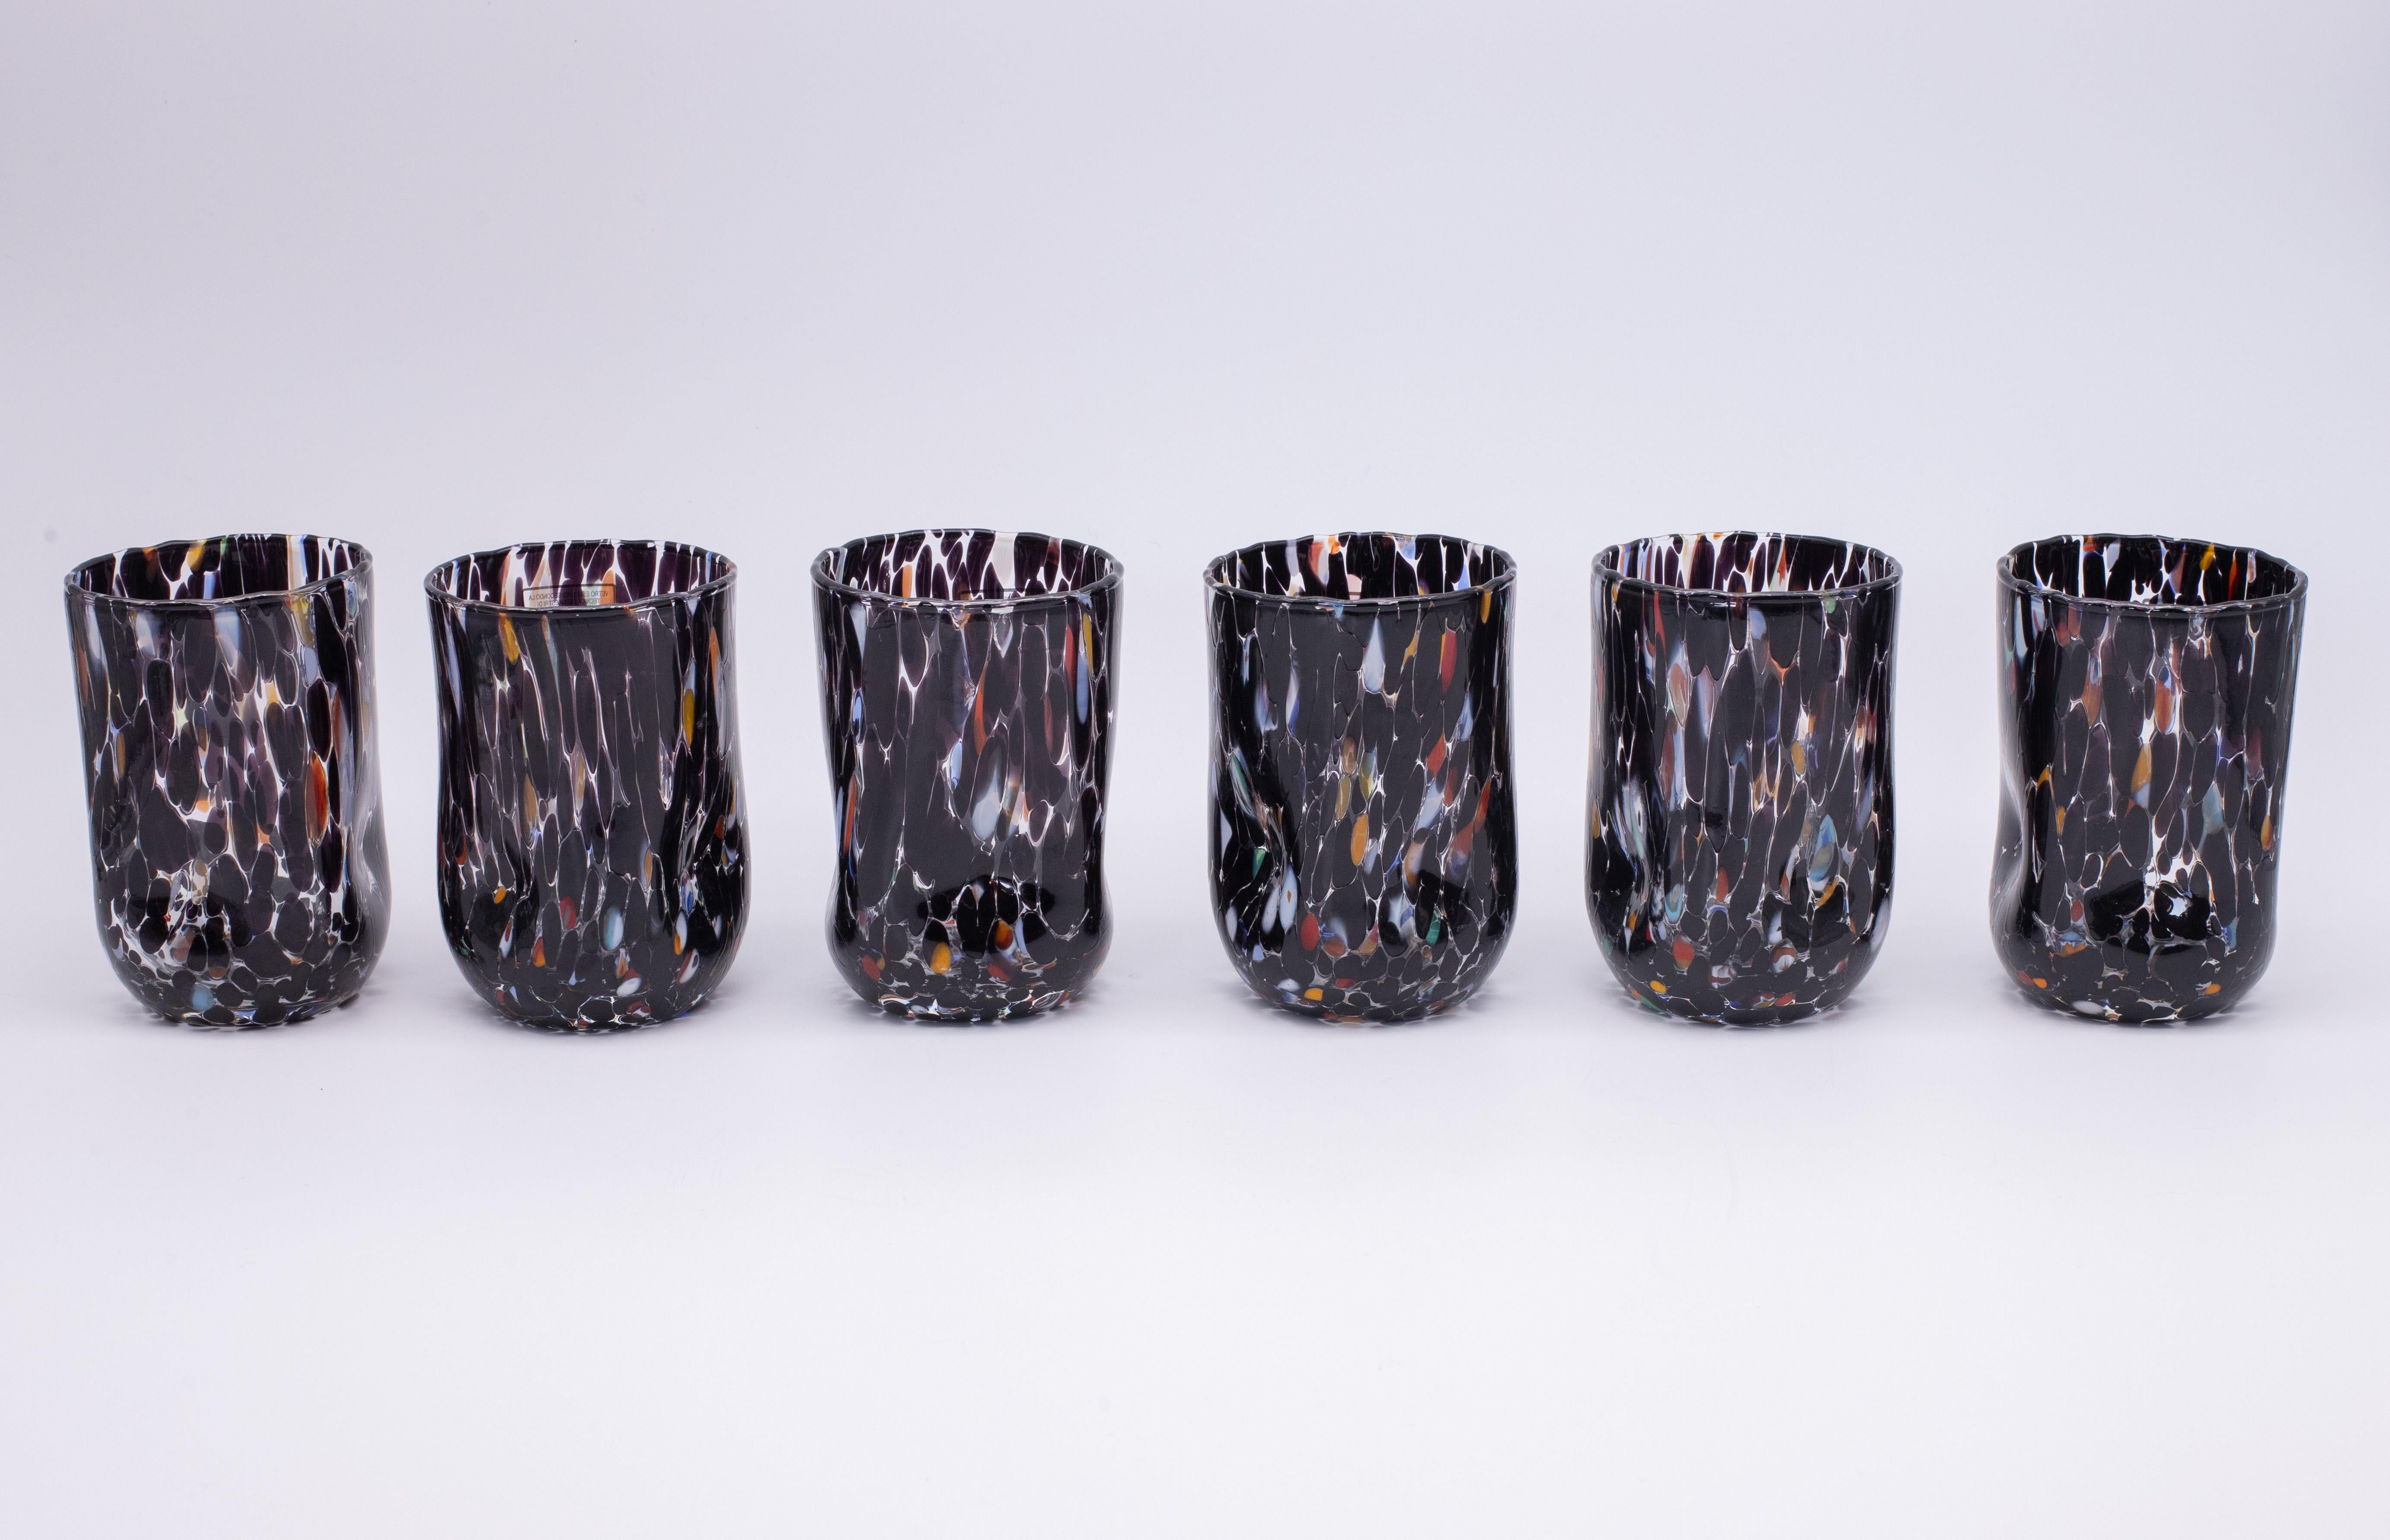 Set of six water/drink/wine glasses color Black - Murano glass - Made in Italy.

These individual Murano glasses are inspired by the classic 